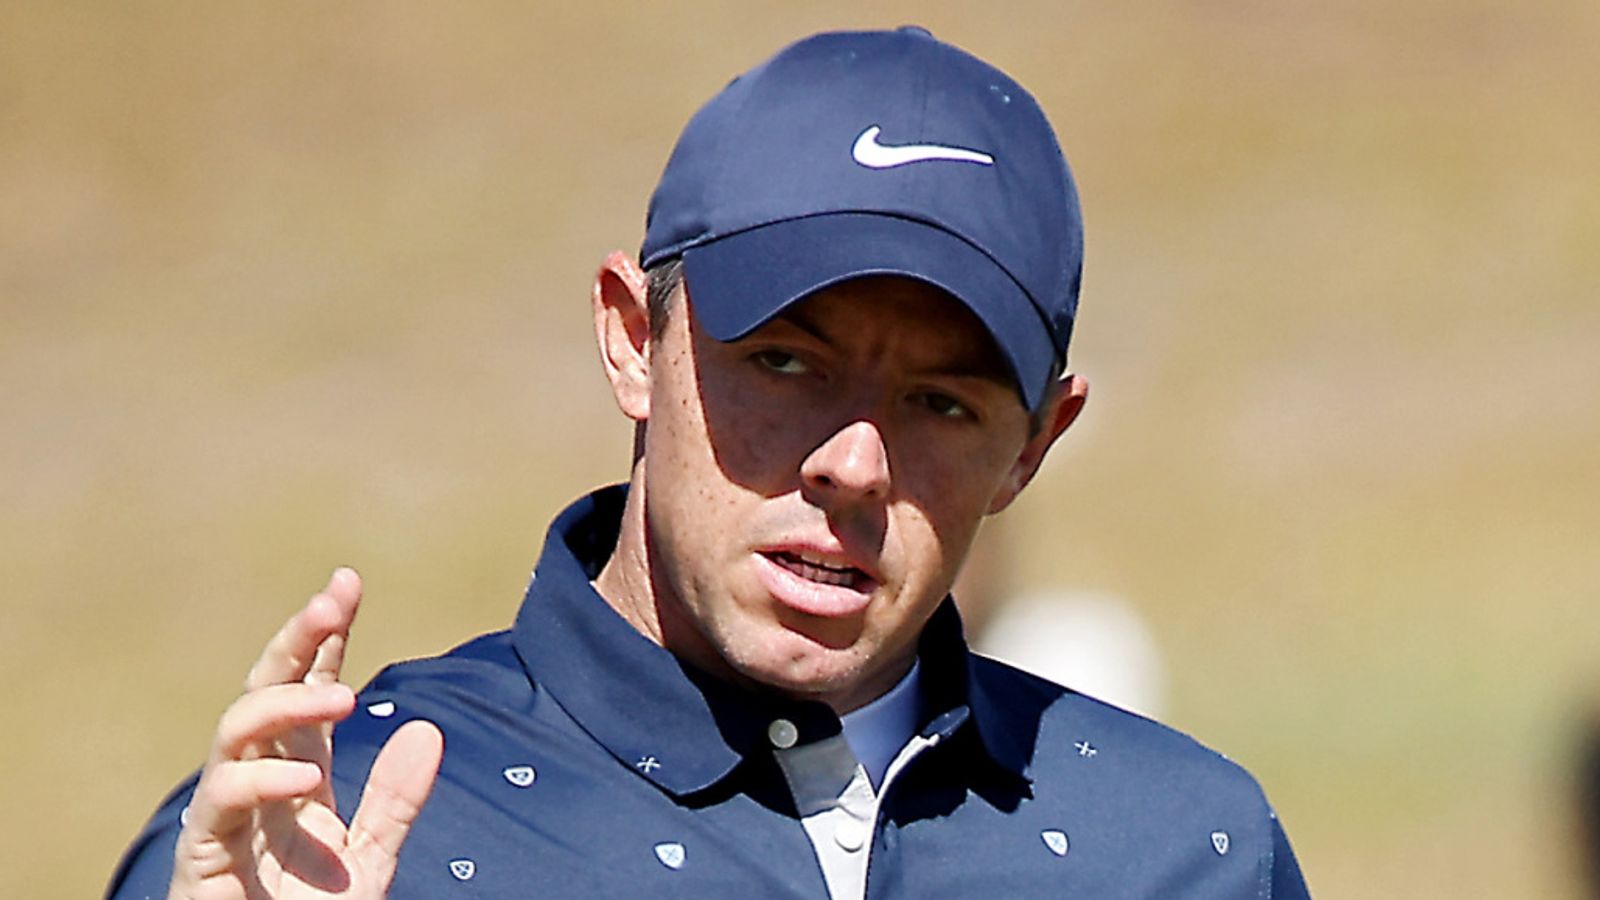 rory-mcilroy-one-off-early-lead-in-cj-cup-title-defence-as-he-closes-on-world-no-1-return